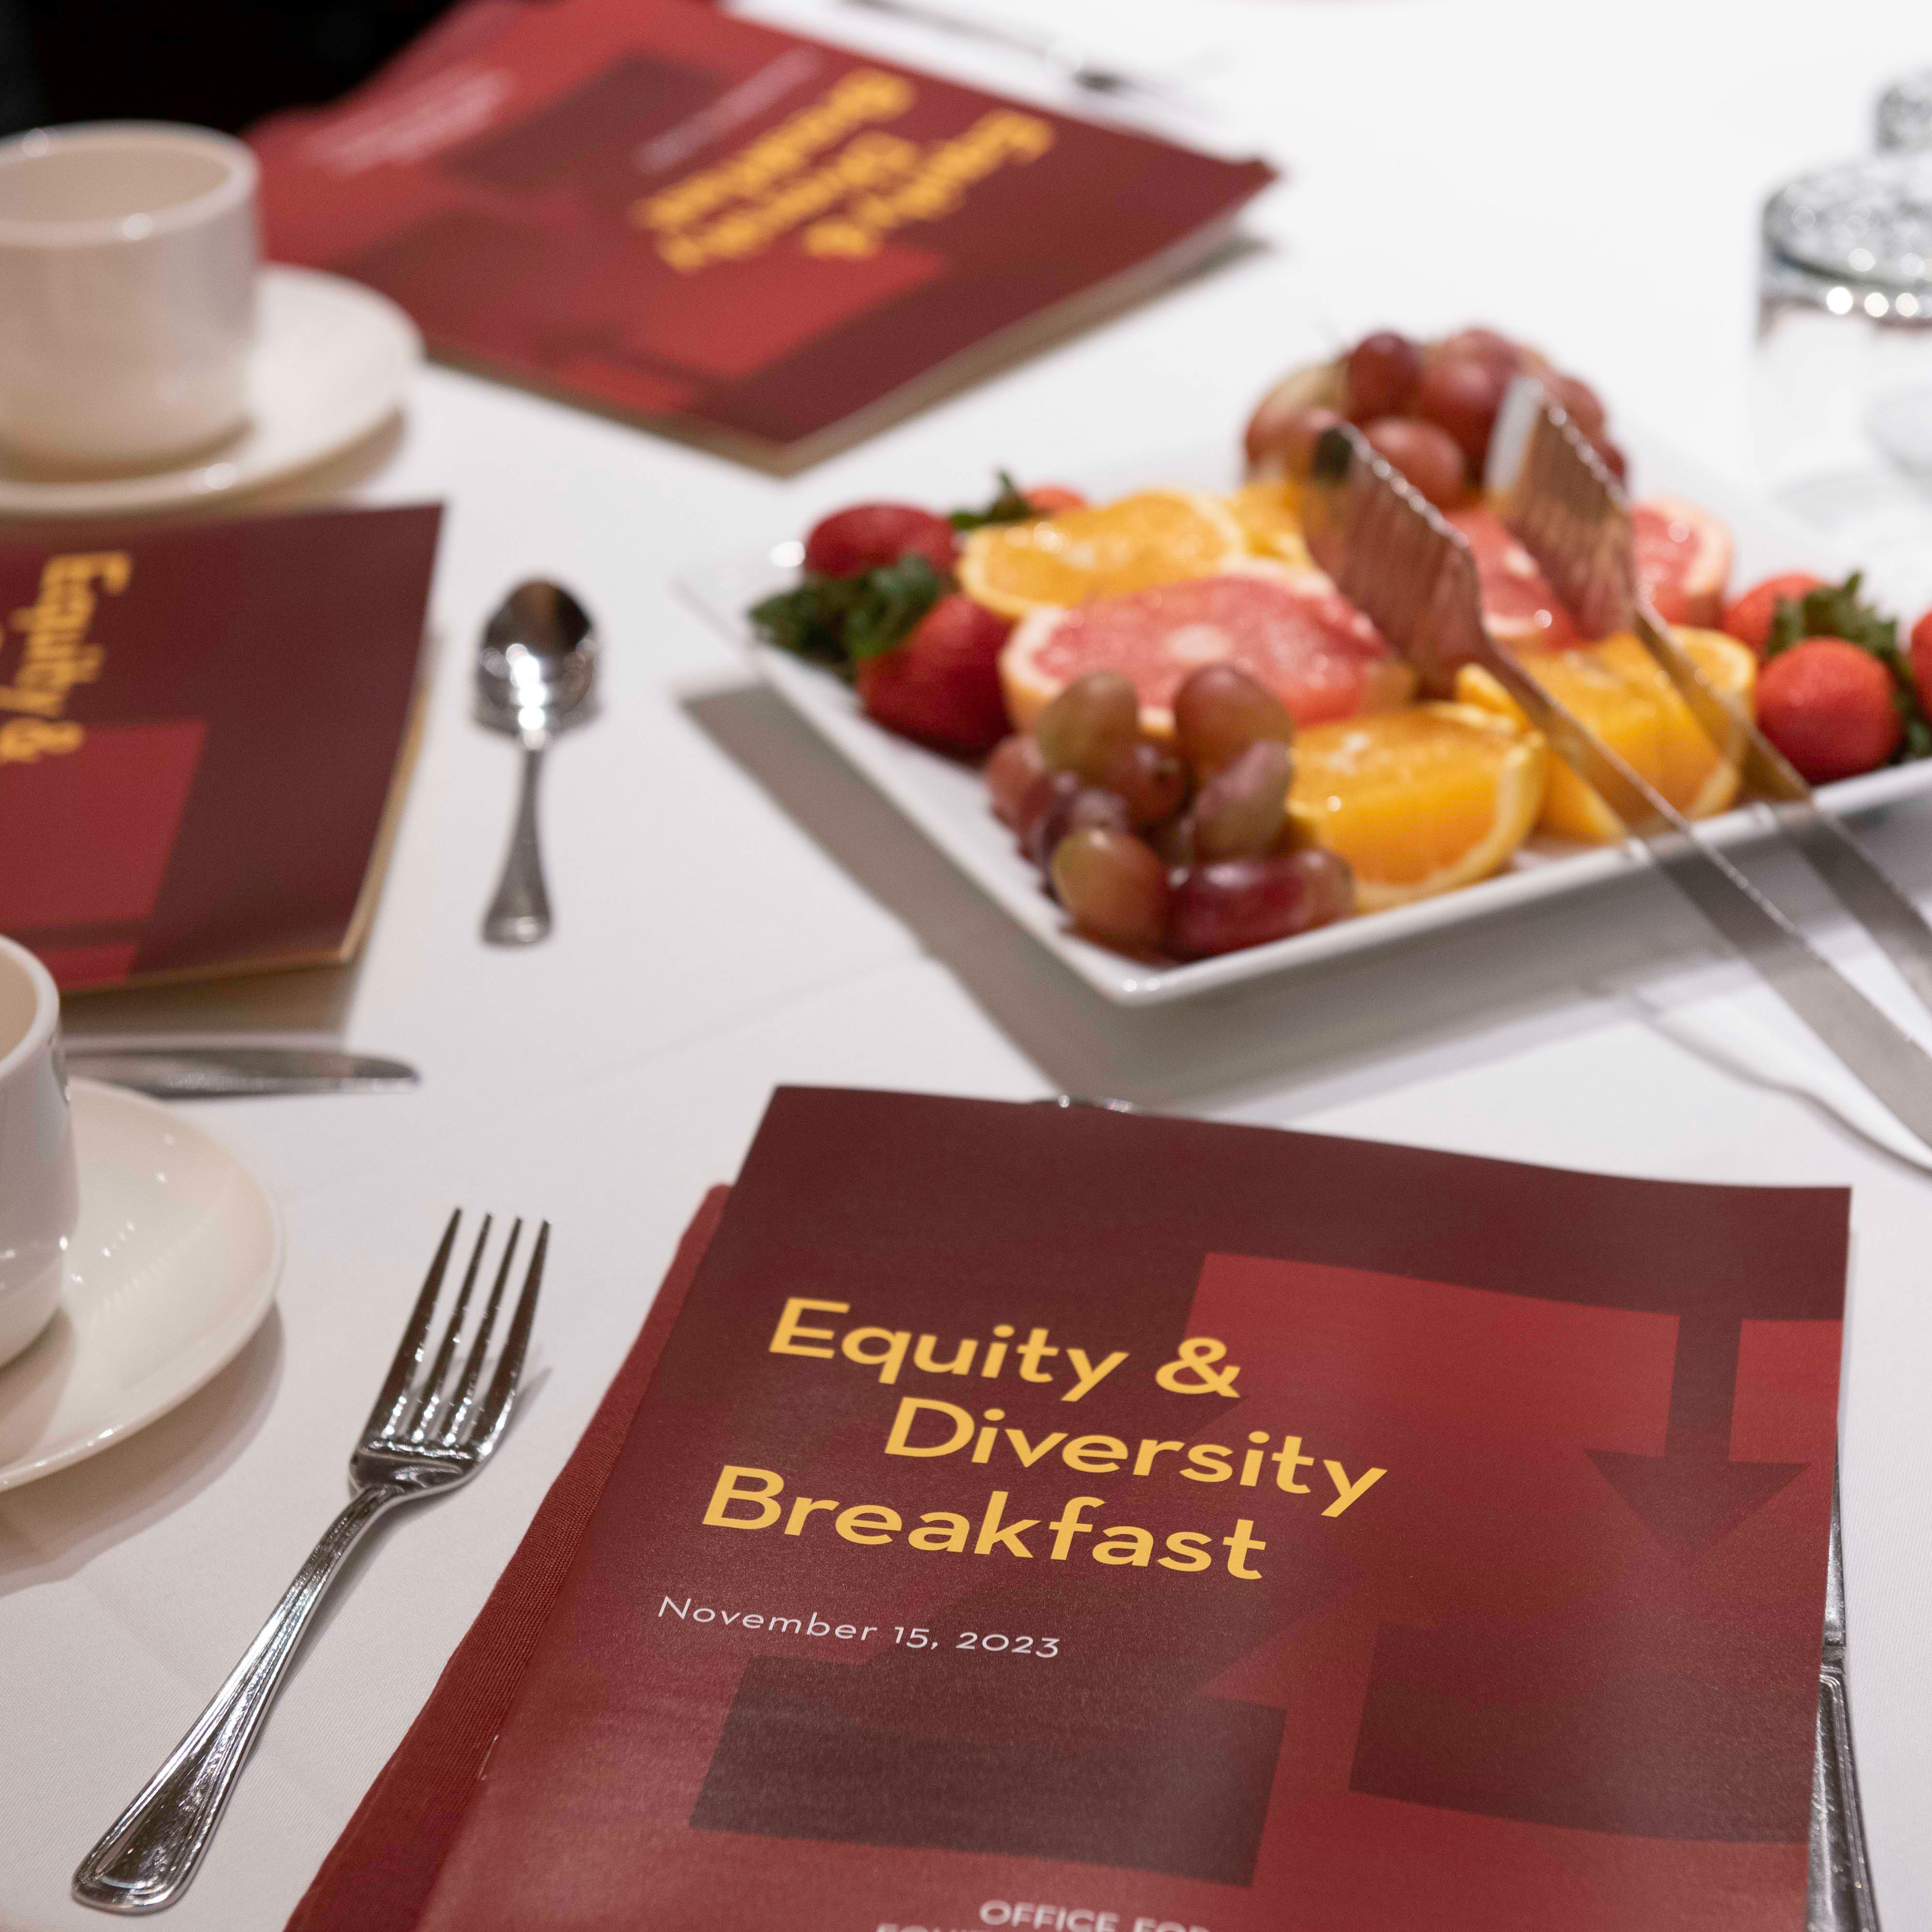 Image of a table setting with a program from the 2023 Equity & Diversity Breakfast